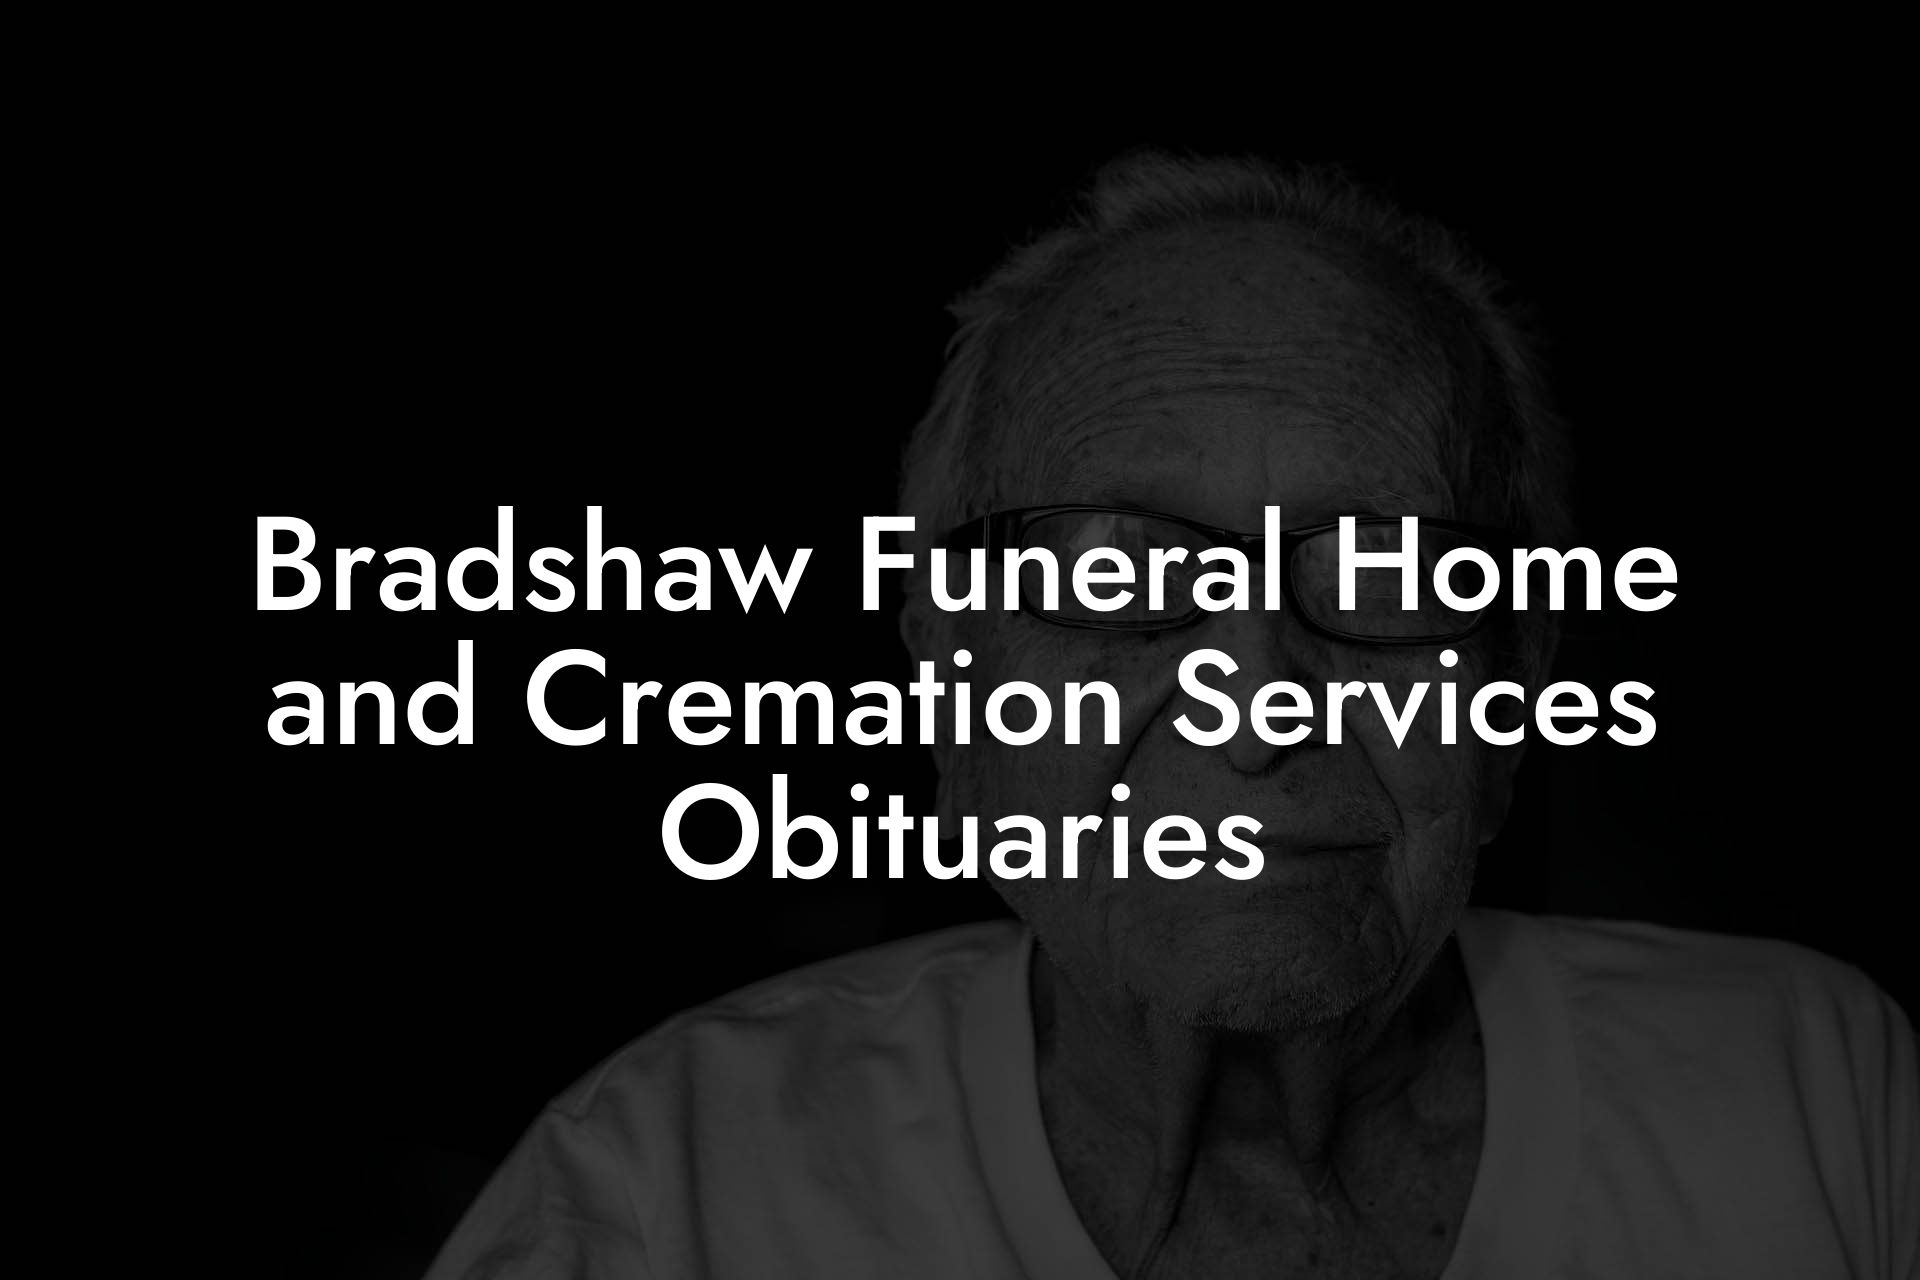 Bradshaw Funeral Home and Cremation Services Obituaries